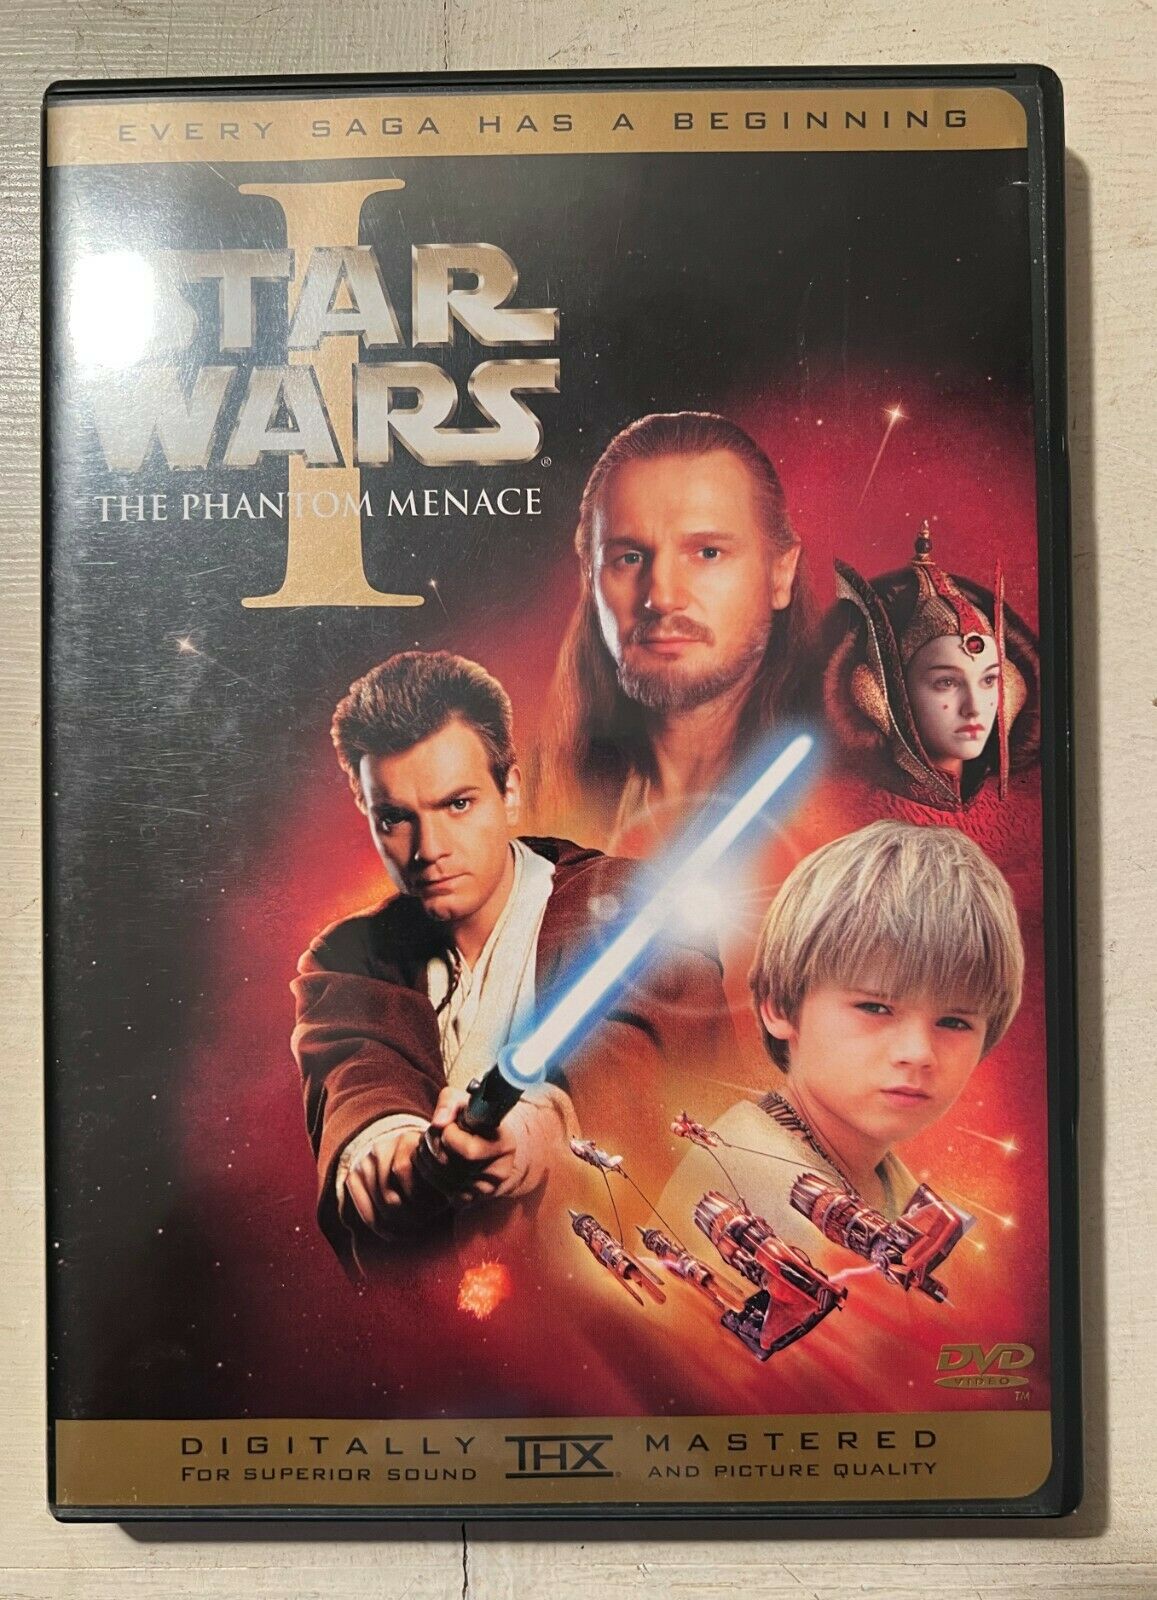 Star Wars The Phantom Menace DVD 2 set Widescreen Used – Close Collectibles